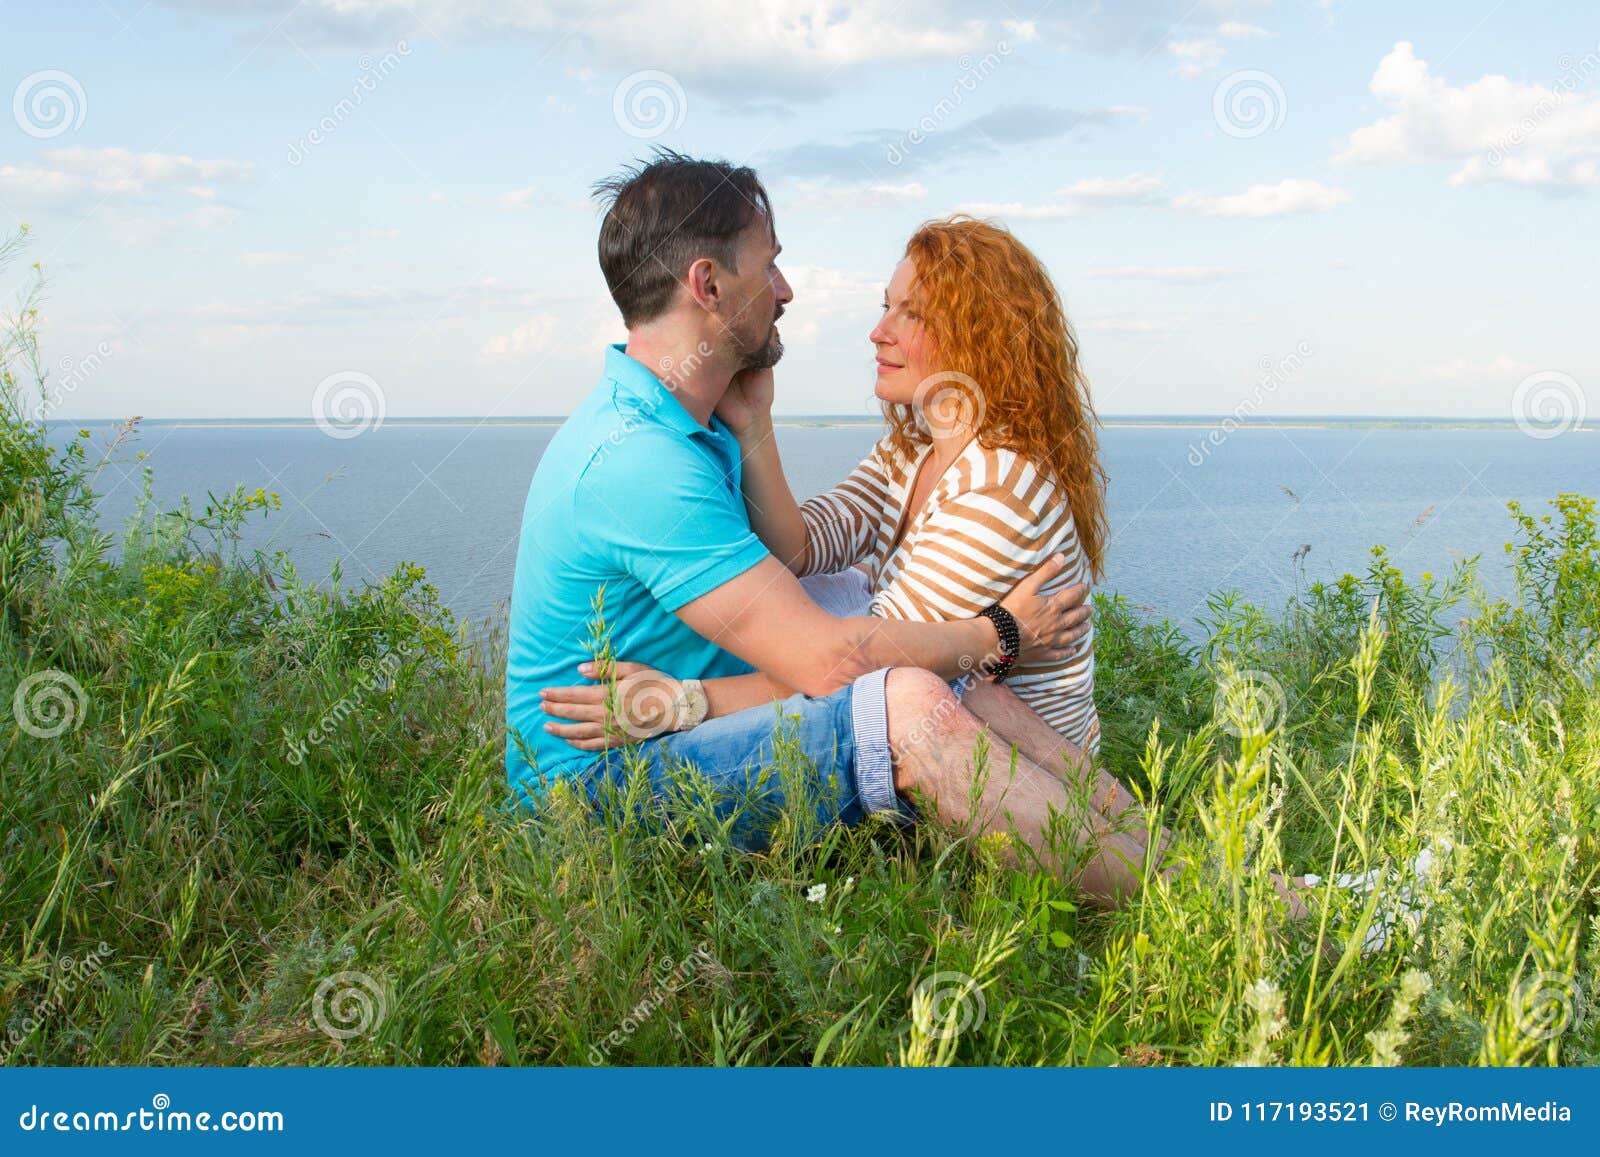 A Couple In Love Outdoor Lovers Sitting Hugged On The Grass At Lake Bank In Grass On Water And